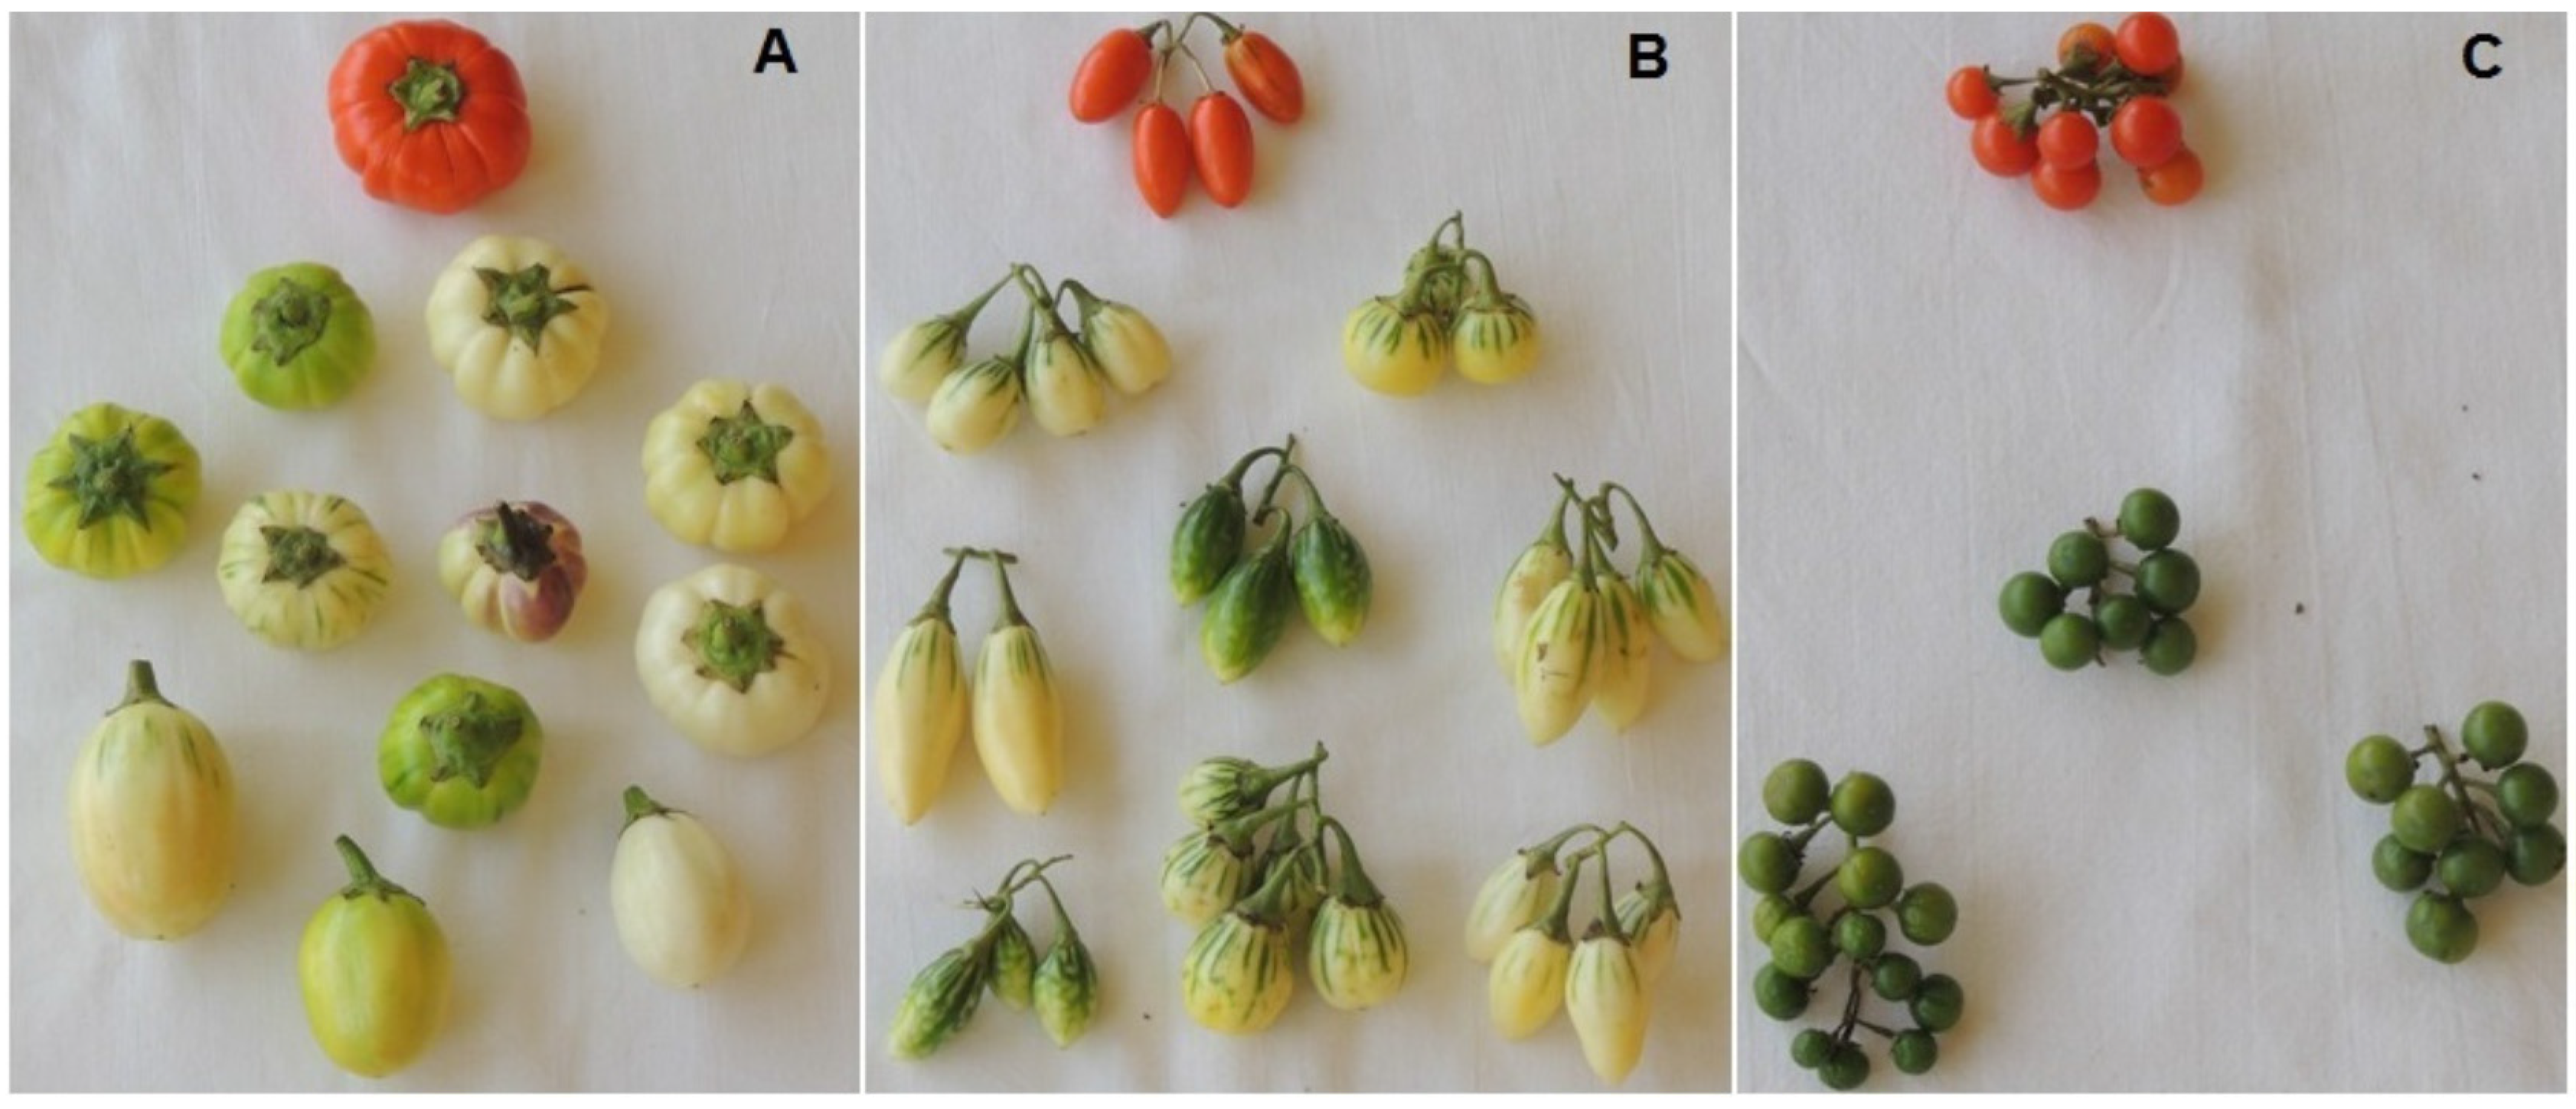 Representative fruits of each of the scarlet eggplant complex (S.